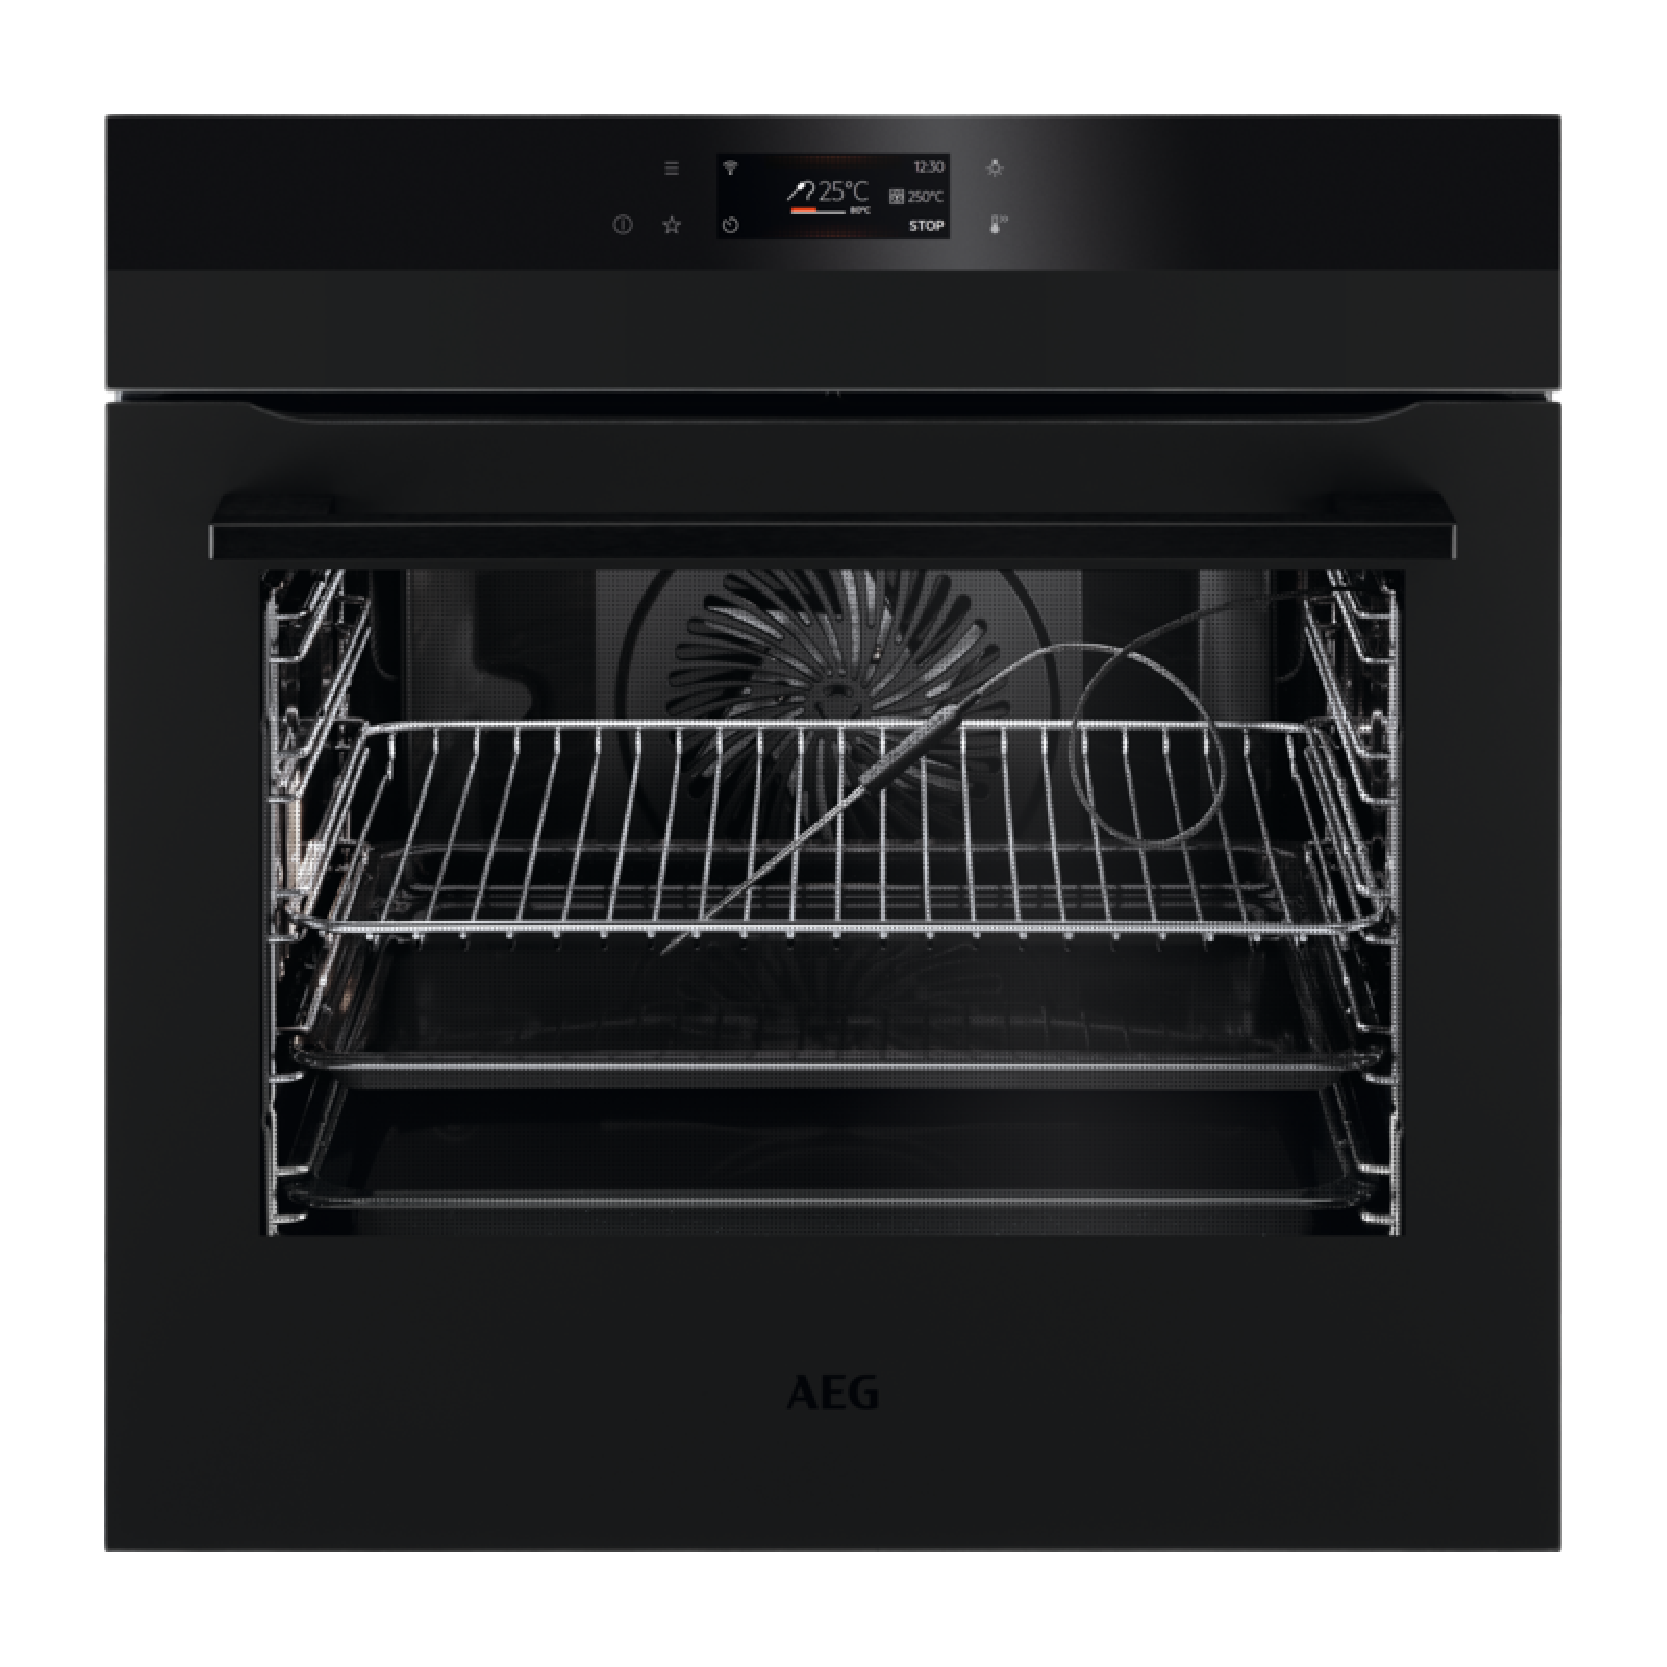 MATT BLACK SENSECOOK PYROLYTIC SELF-CLEANING OVEN WITH TOUCH CONTROLS AEG | BPK748380T